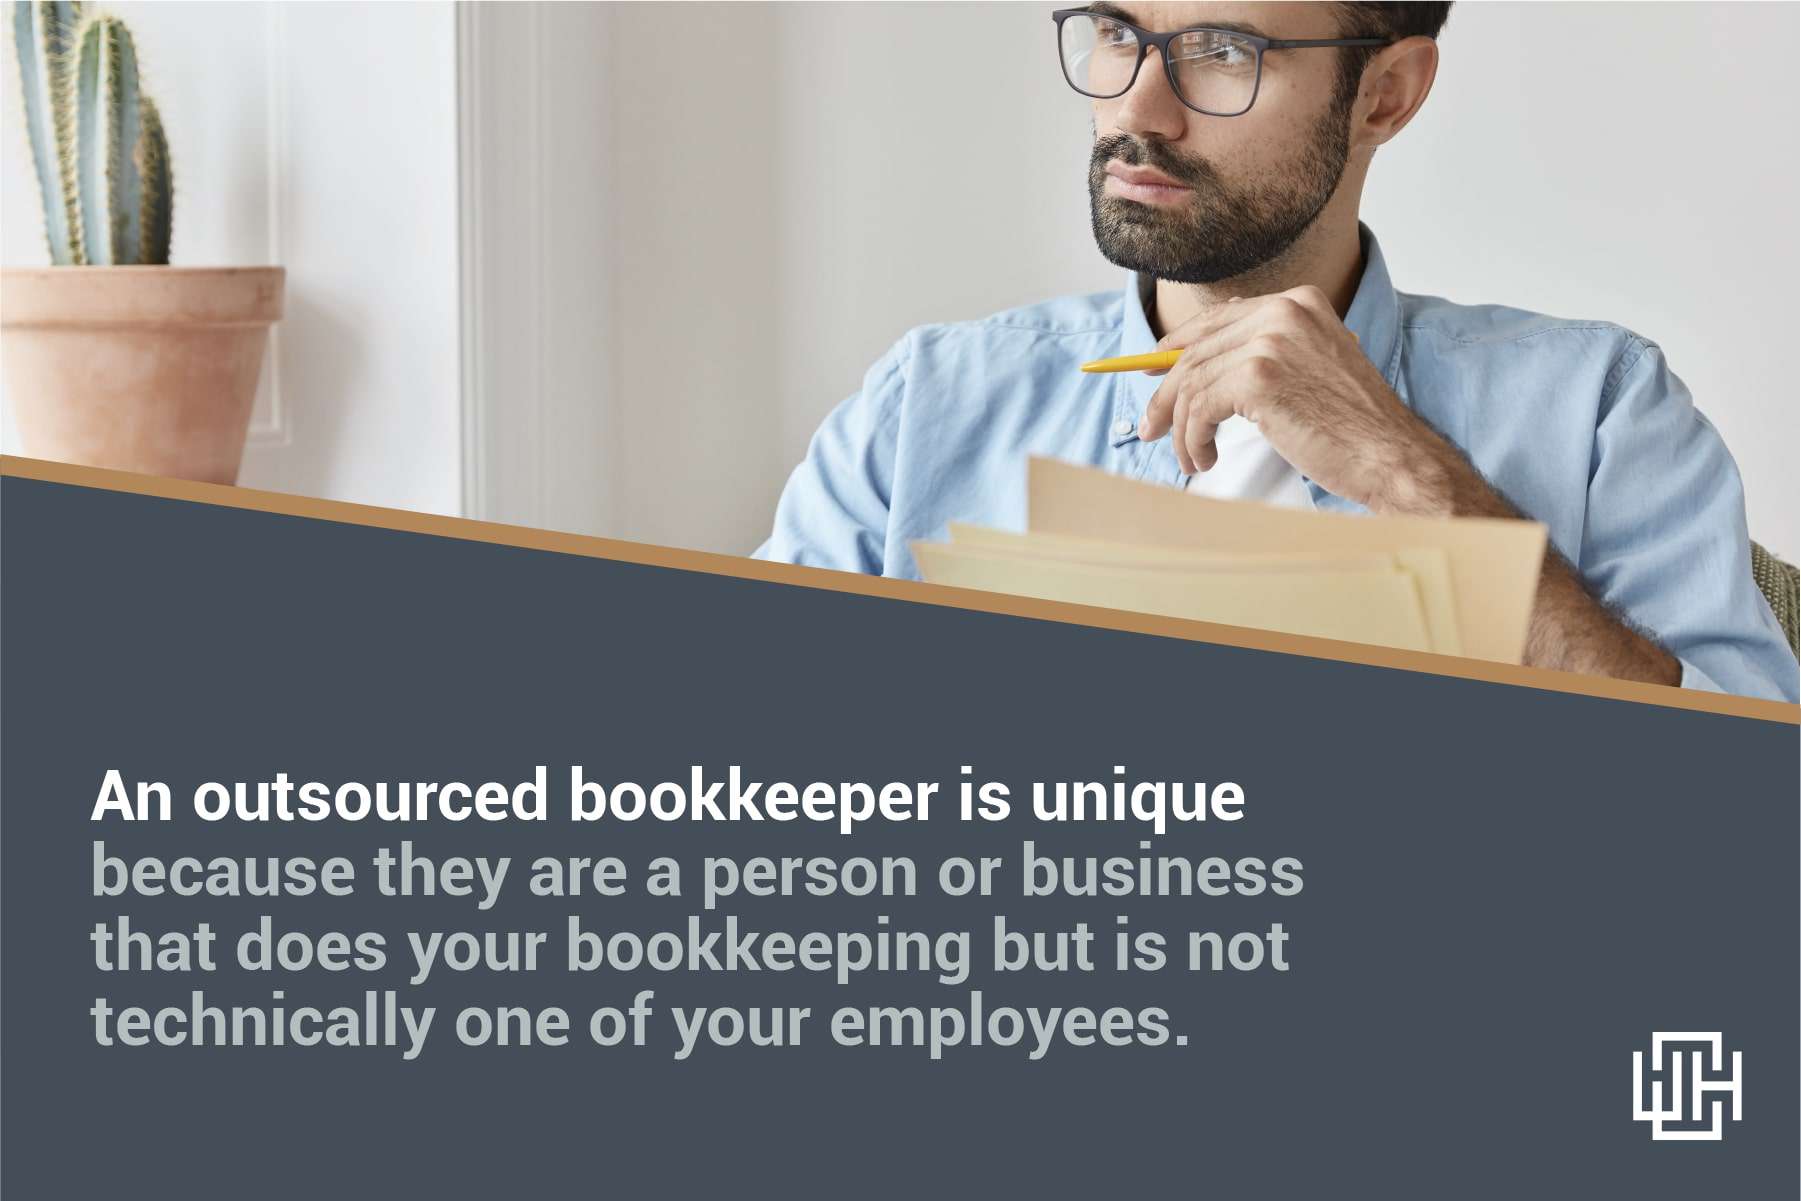 an outsourced bookkeeper is not one of your employees